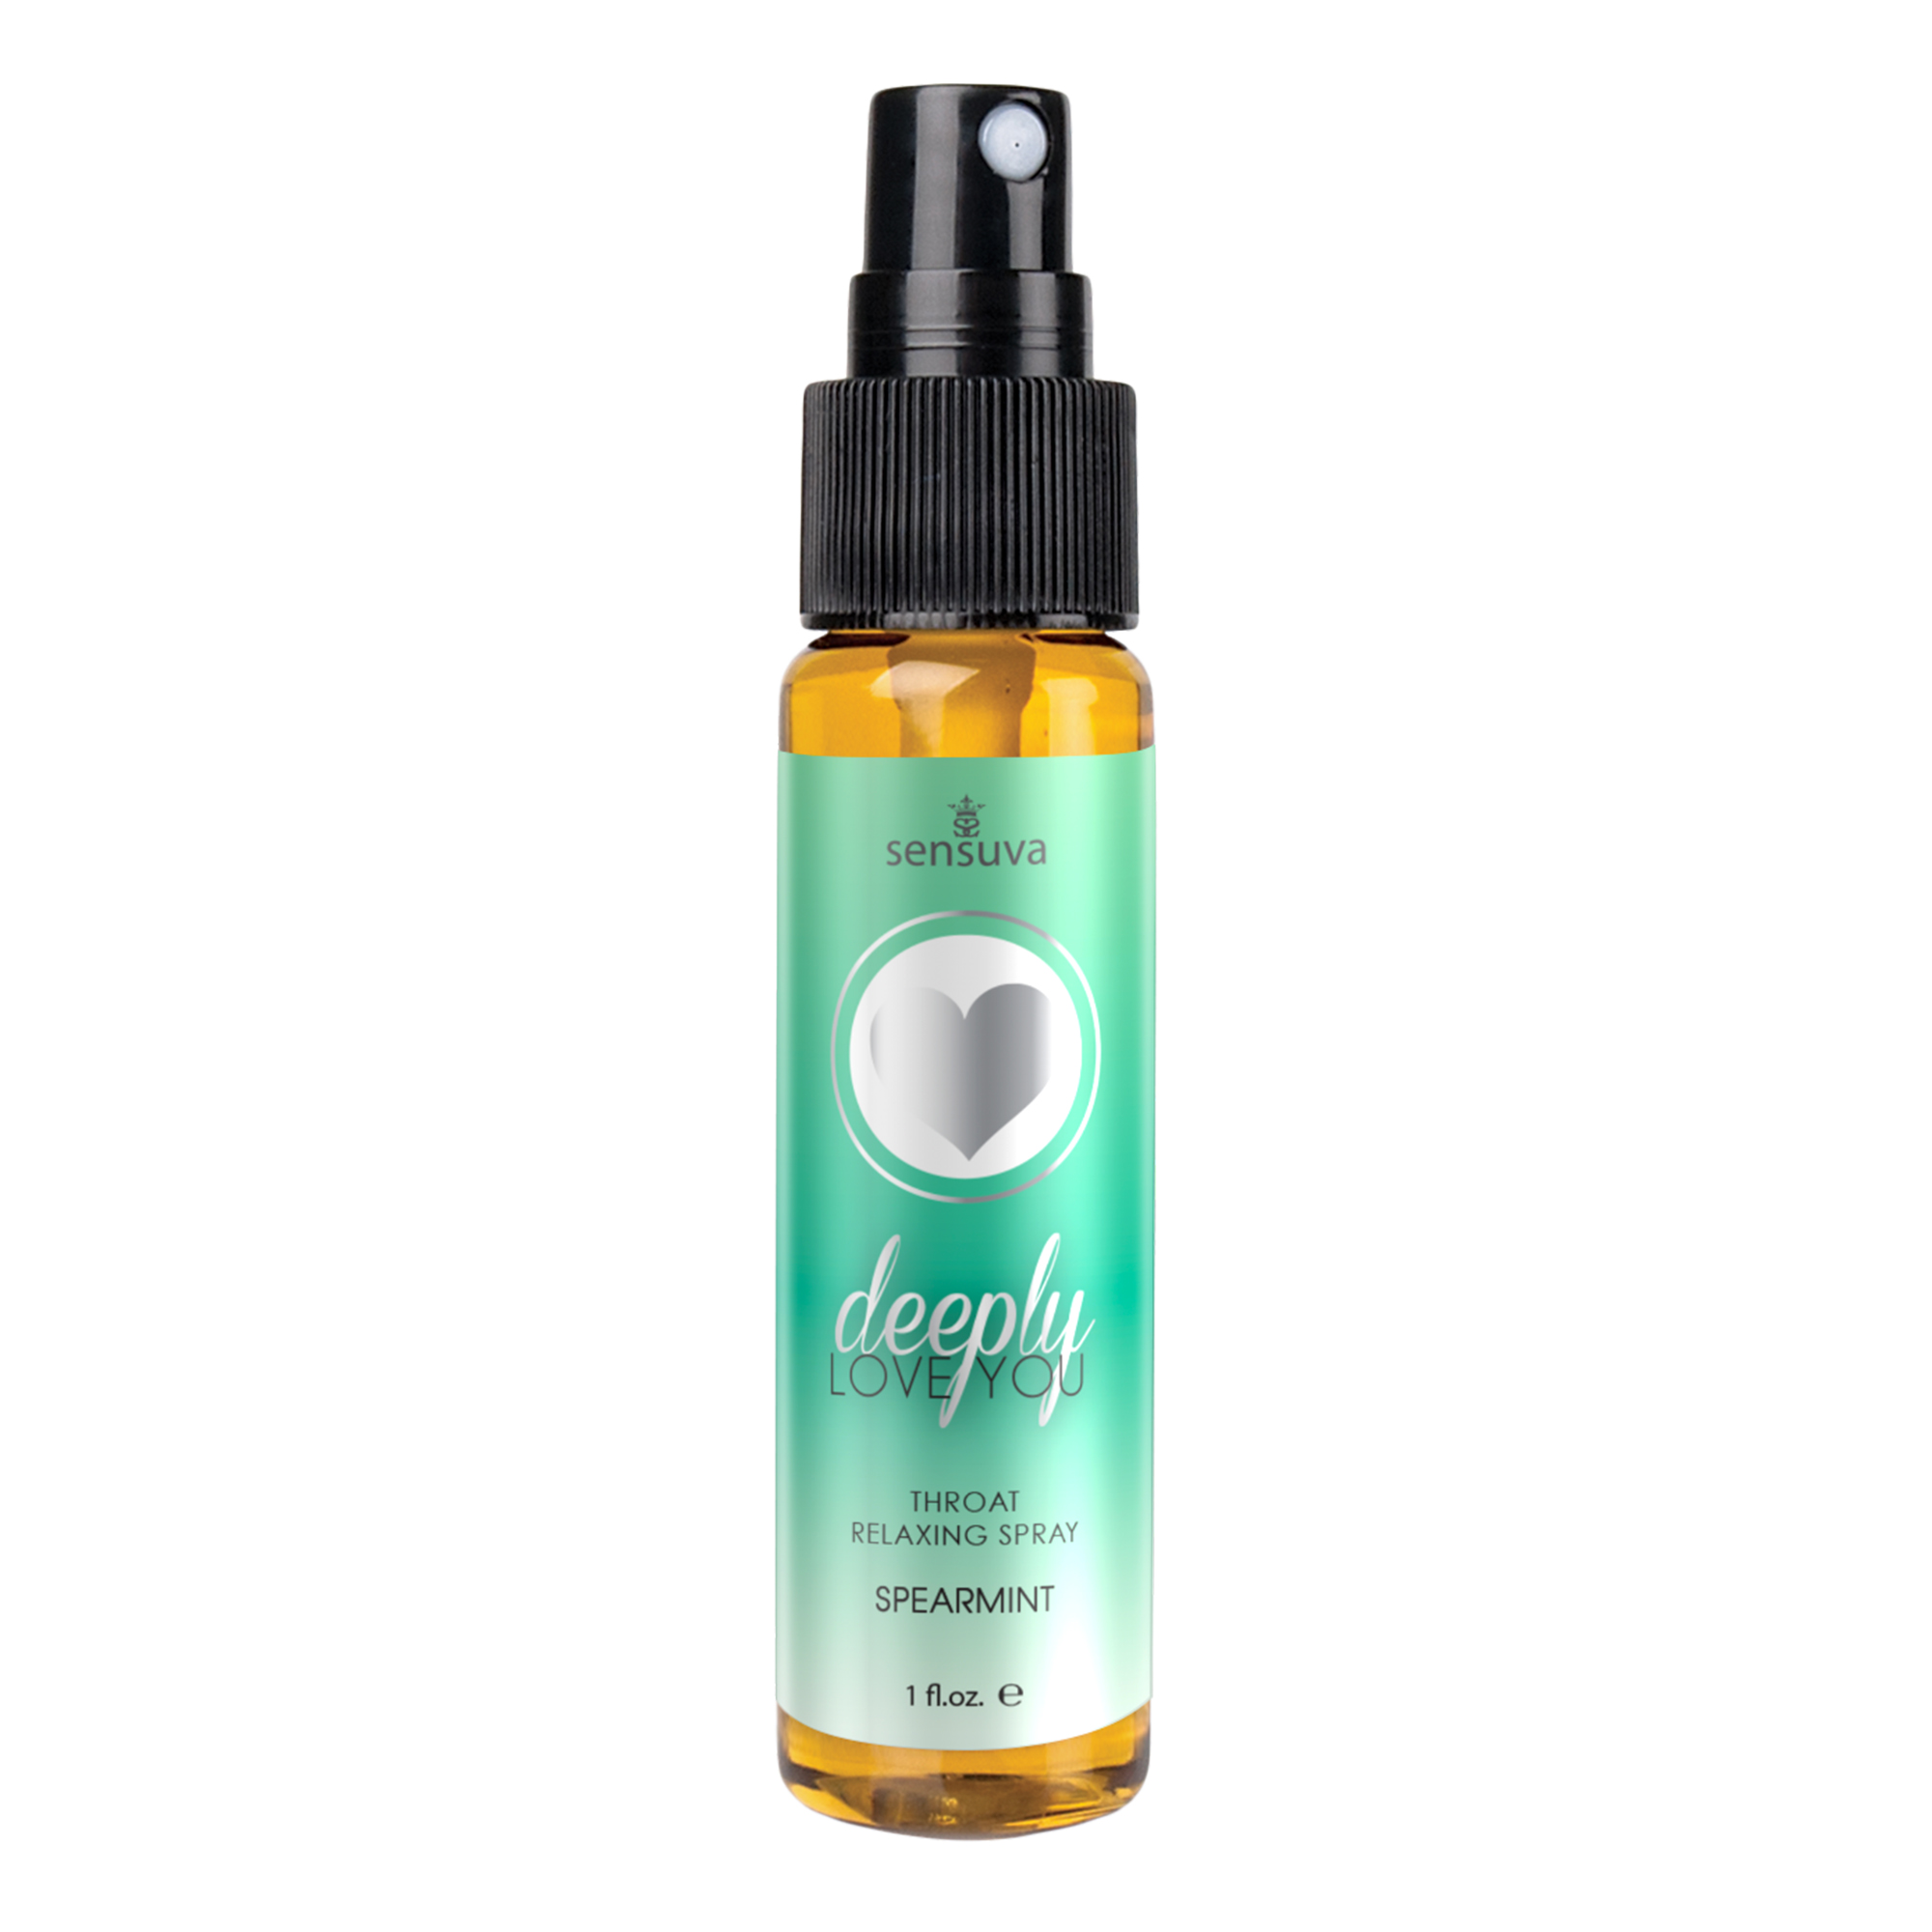 DEEPLY LOVE YOU SPEARMENT THROAT RELAXING SPRAY 1 OZ 